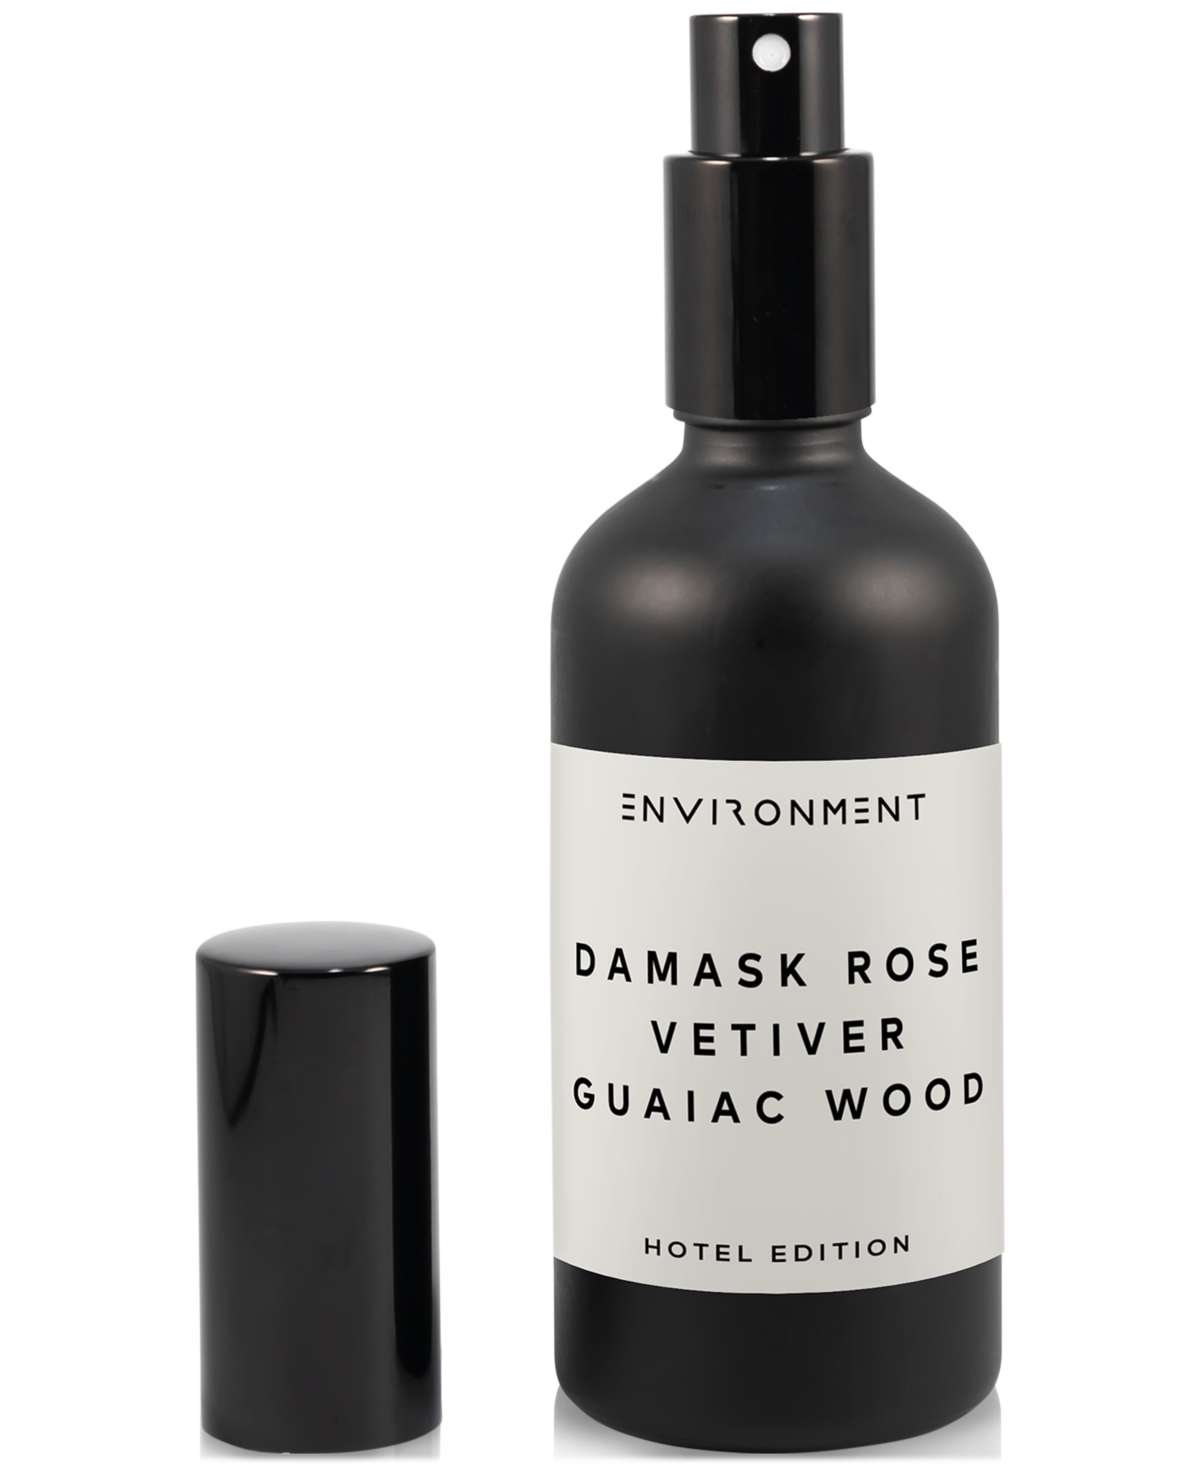 Damask Rose, Vetiver & Guaiac Wood Room Spray (Inspired by 5-Star Luxury Hotels), 3.4 oz.